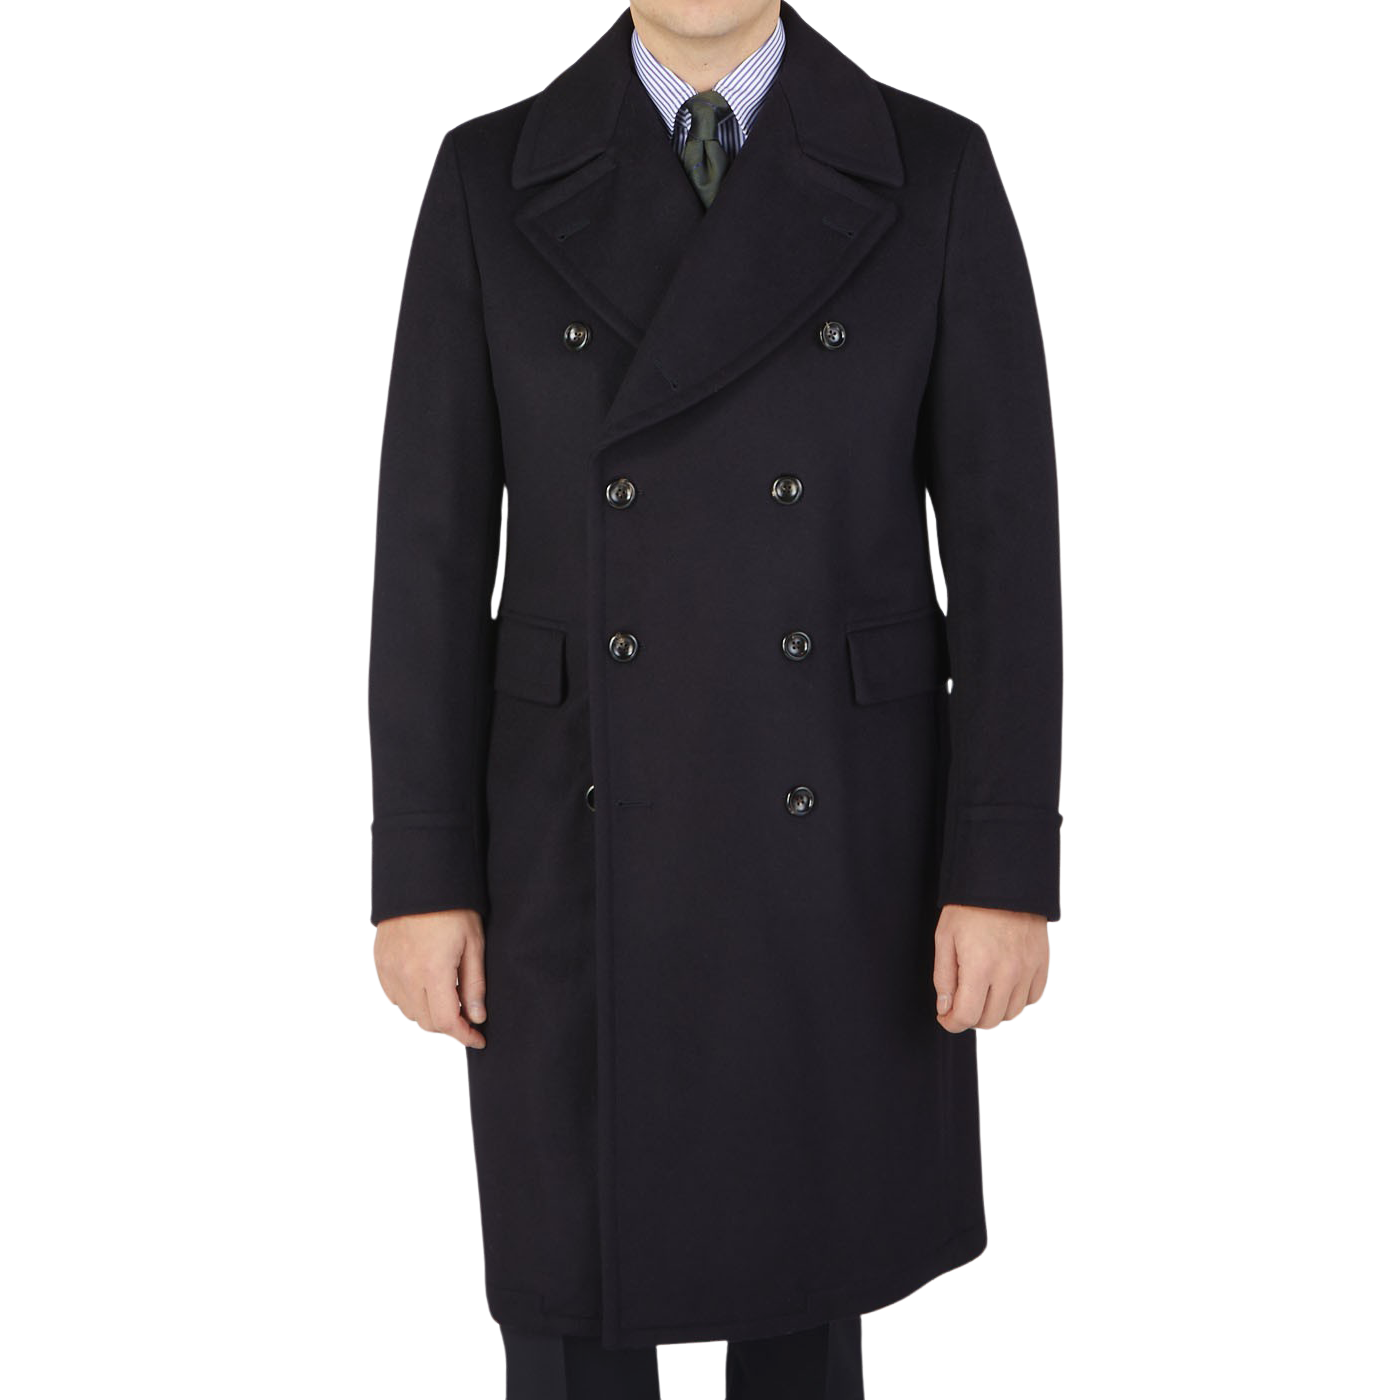 The man is wearing a Luigi Bianchi navy blue wool cashmere dream polo coat.